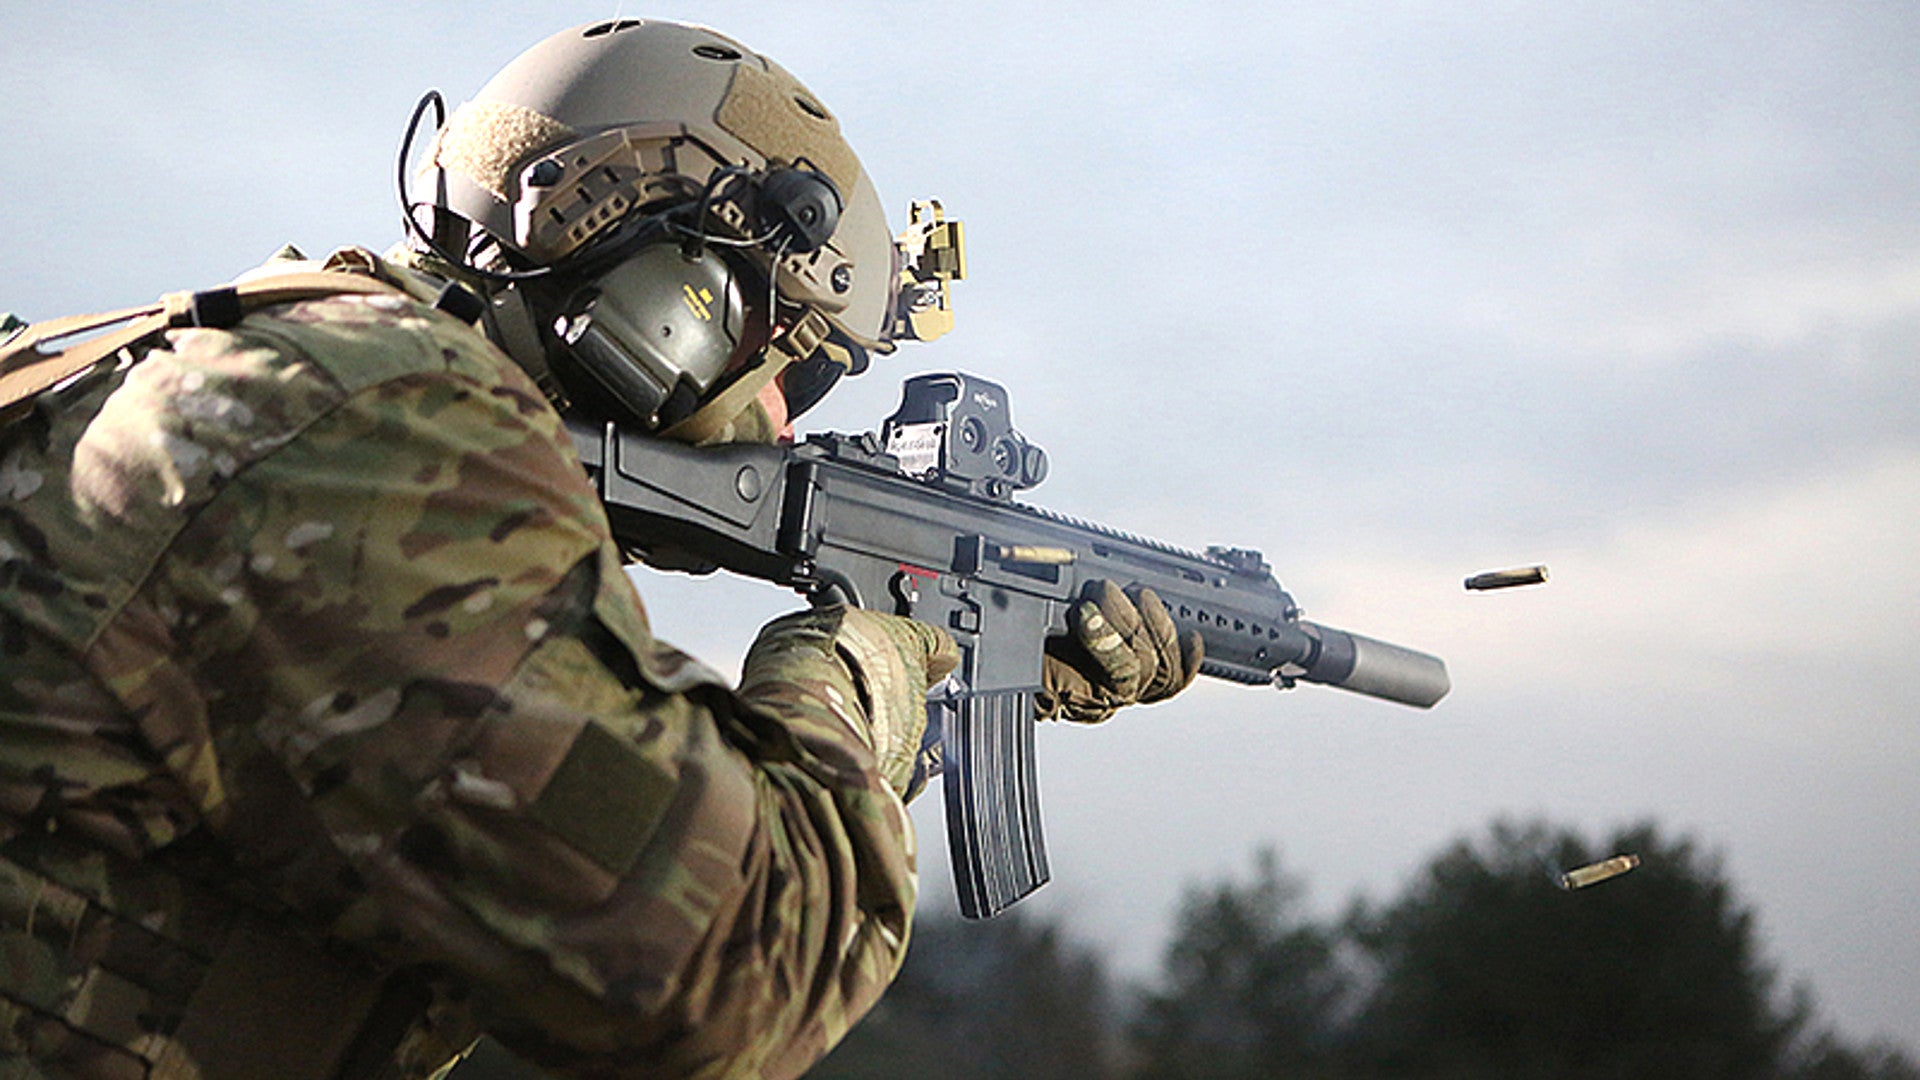 Heckler & Koch’s New Combat Rifle Tries to Blend the Best Features of Existing Designs